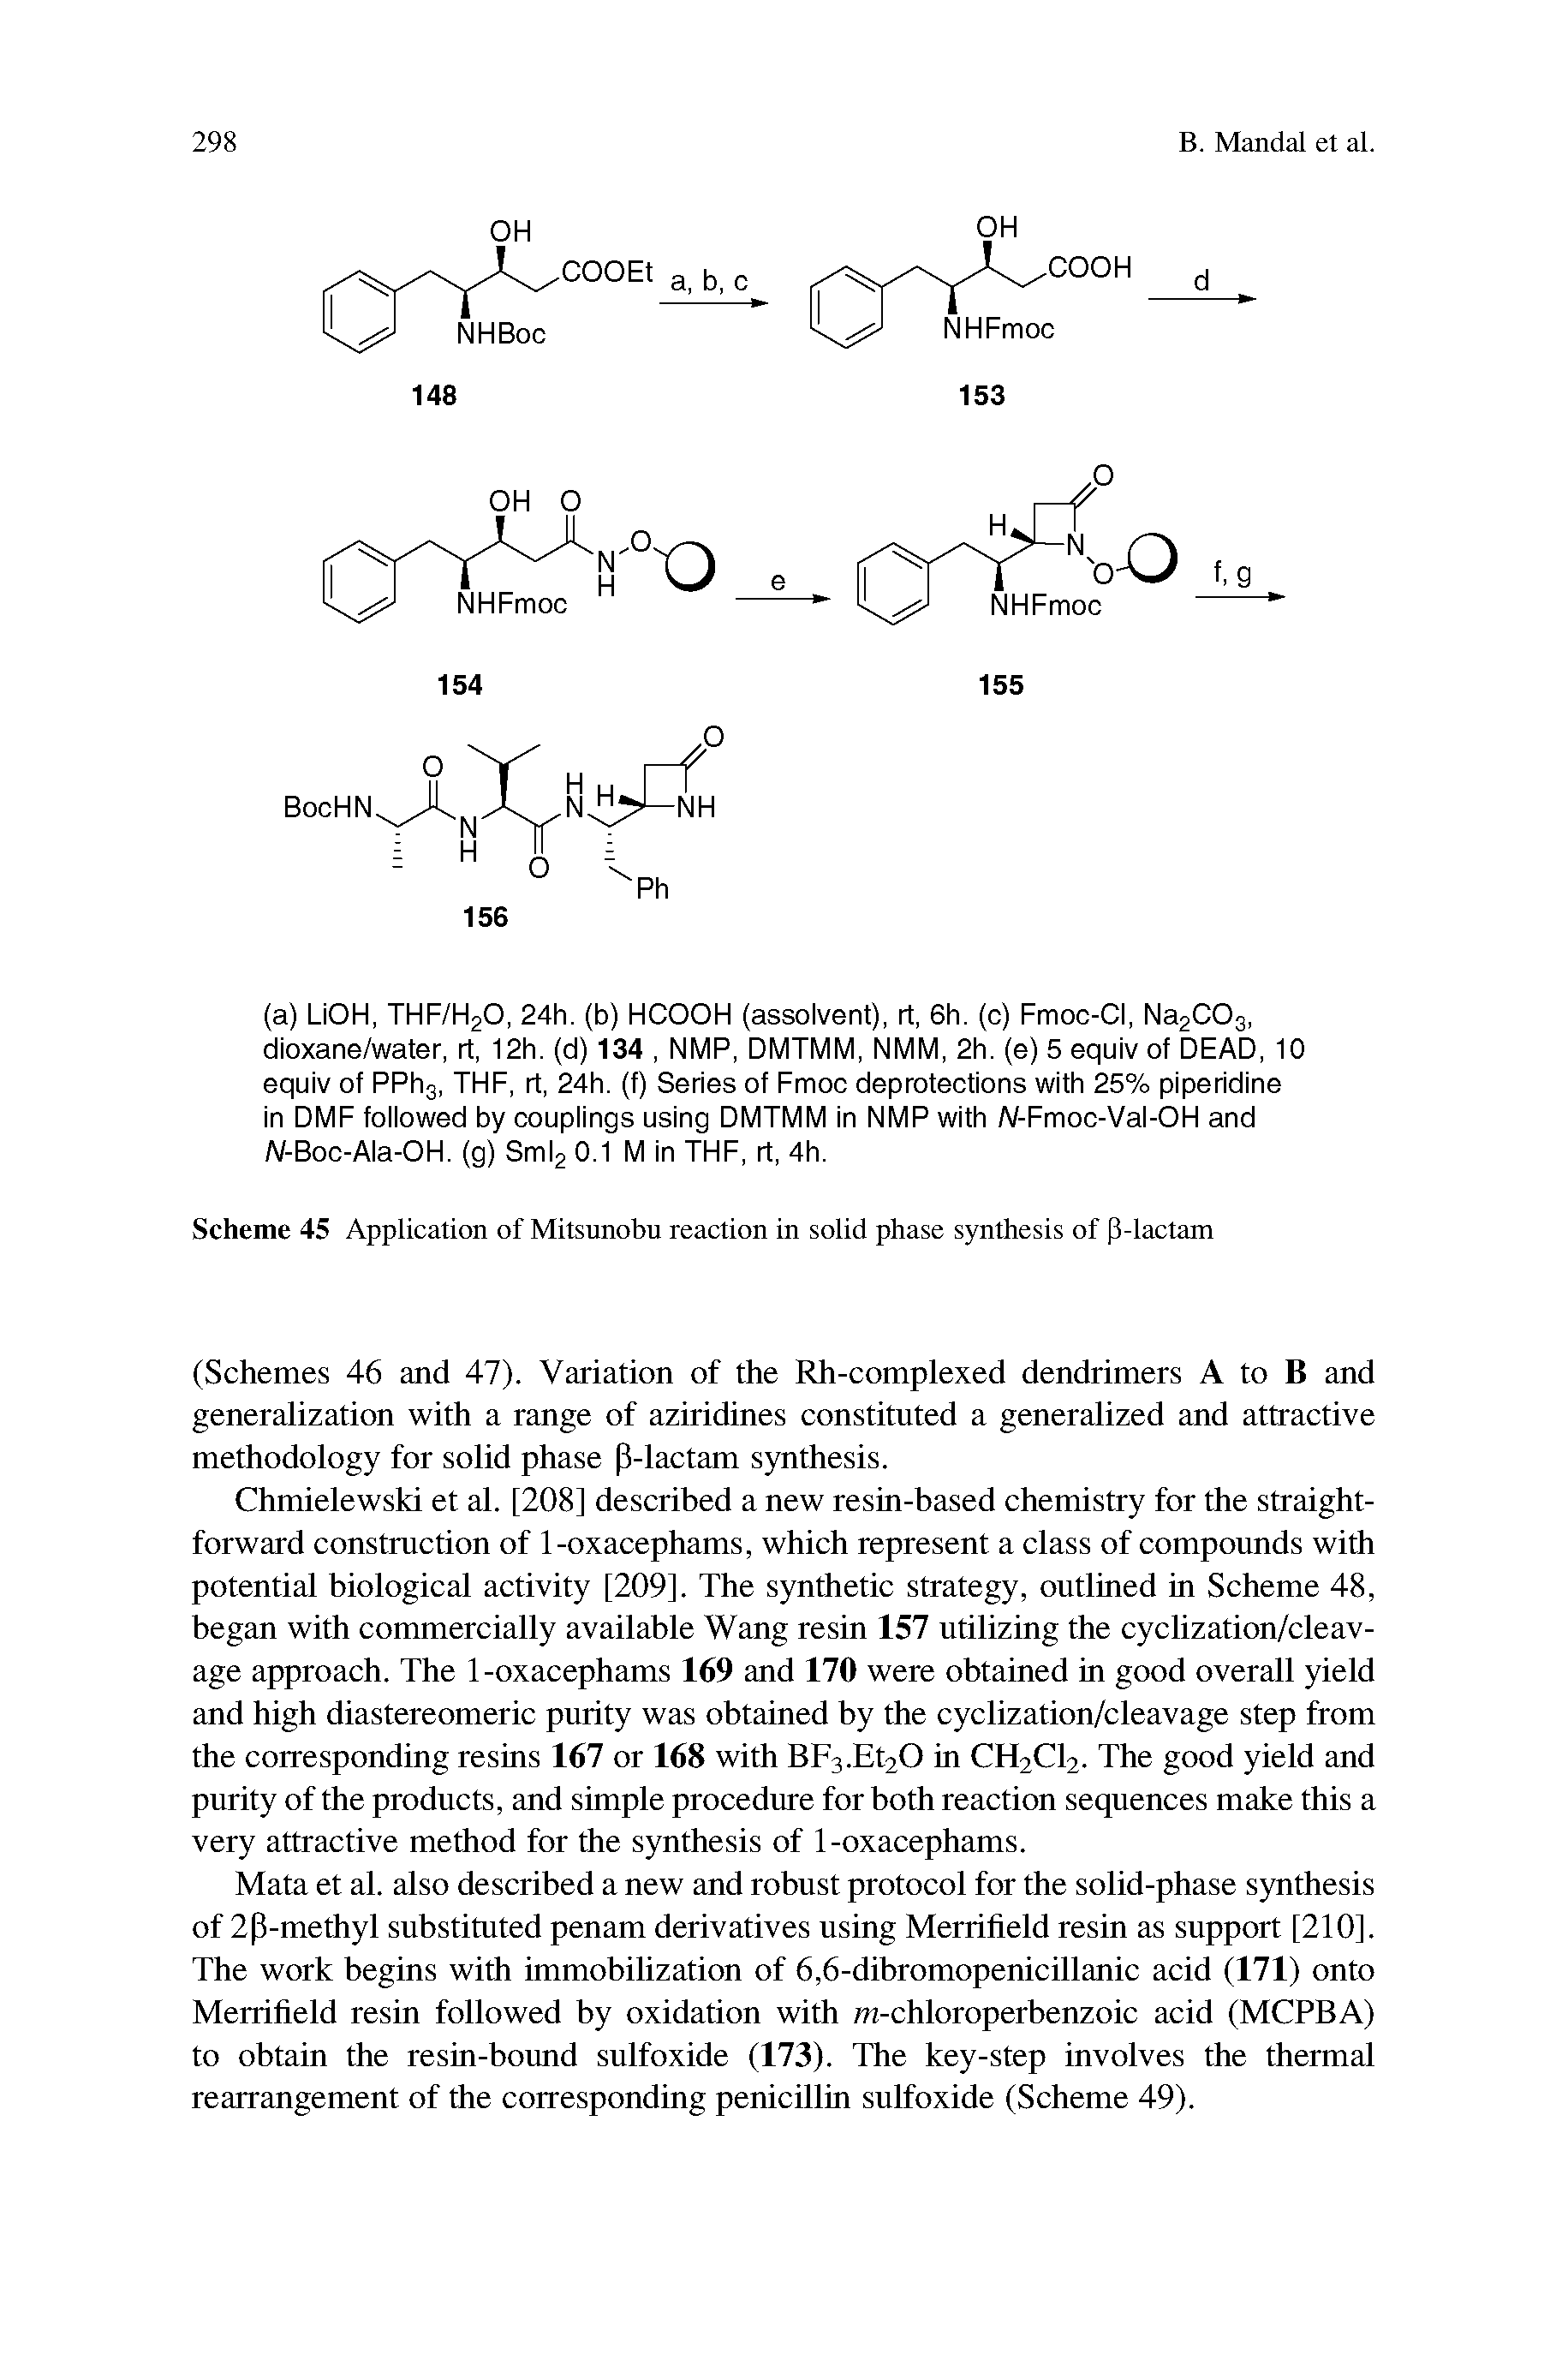 Scheme 45 Application of Mitsunobu reaction in solid phase synthesis of [1-lactam...